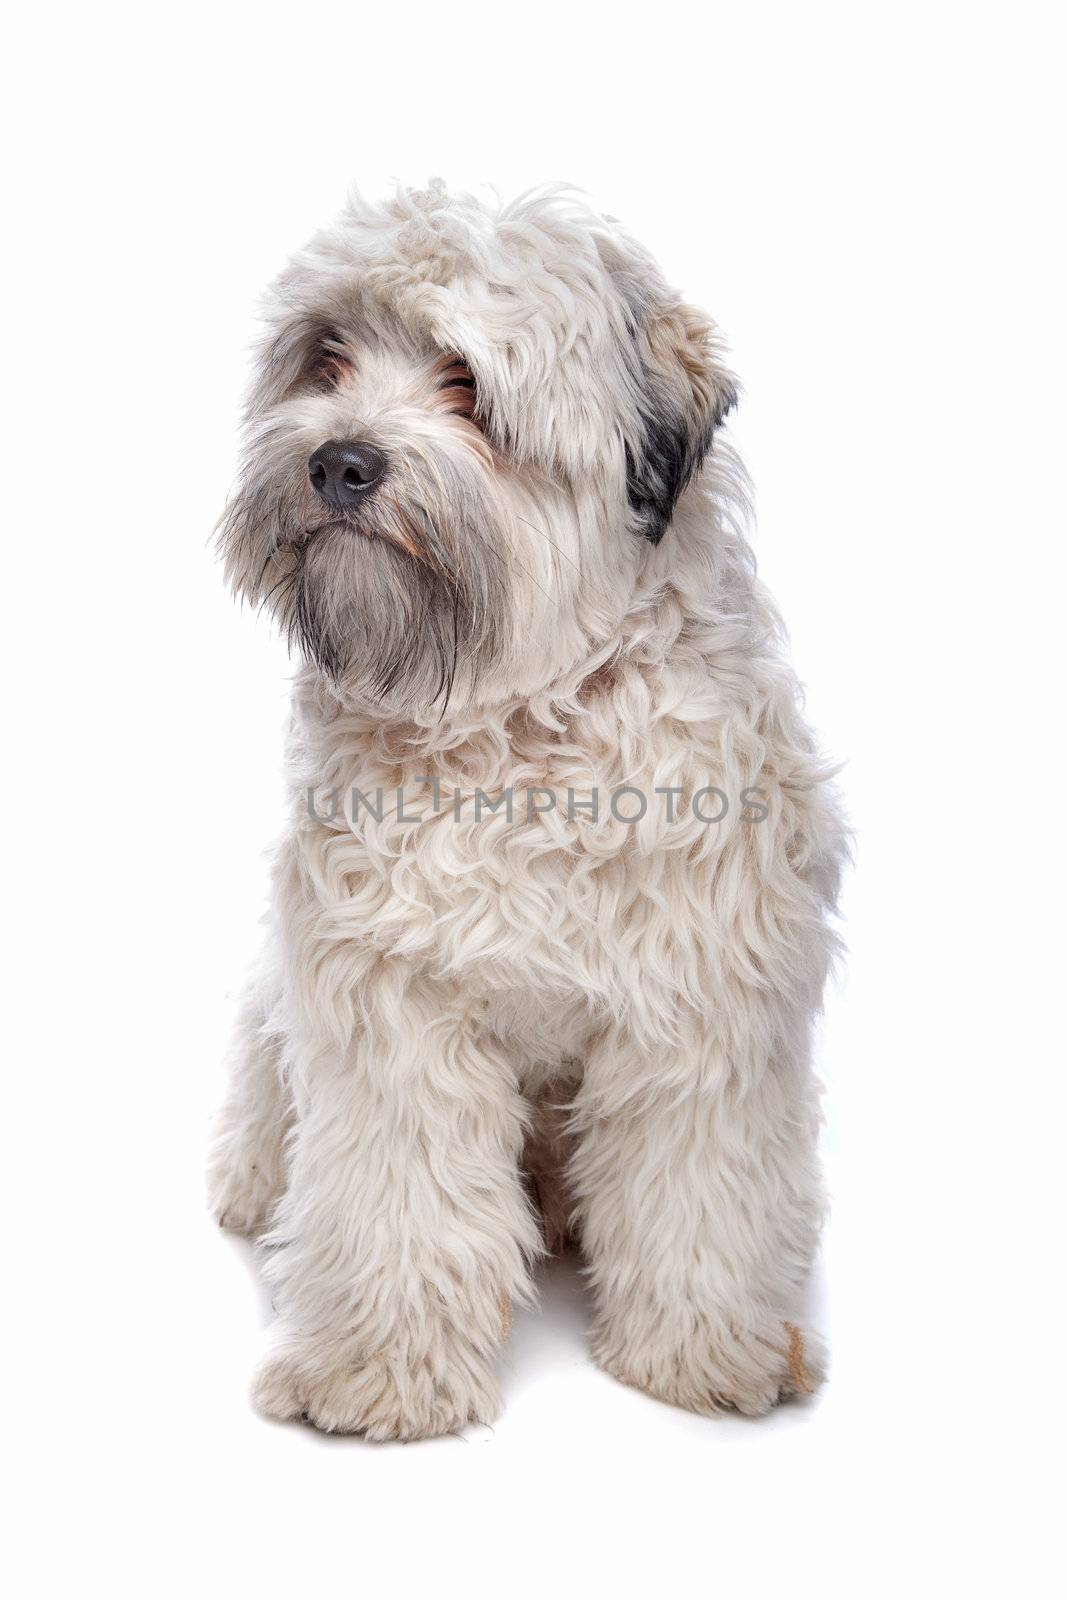 Leeuwhondje (lion-dog)in front of a white background